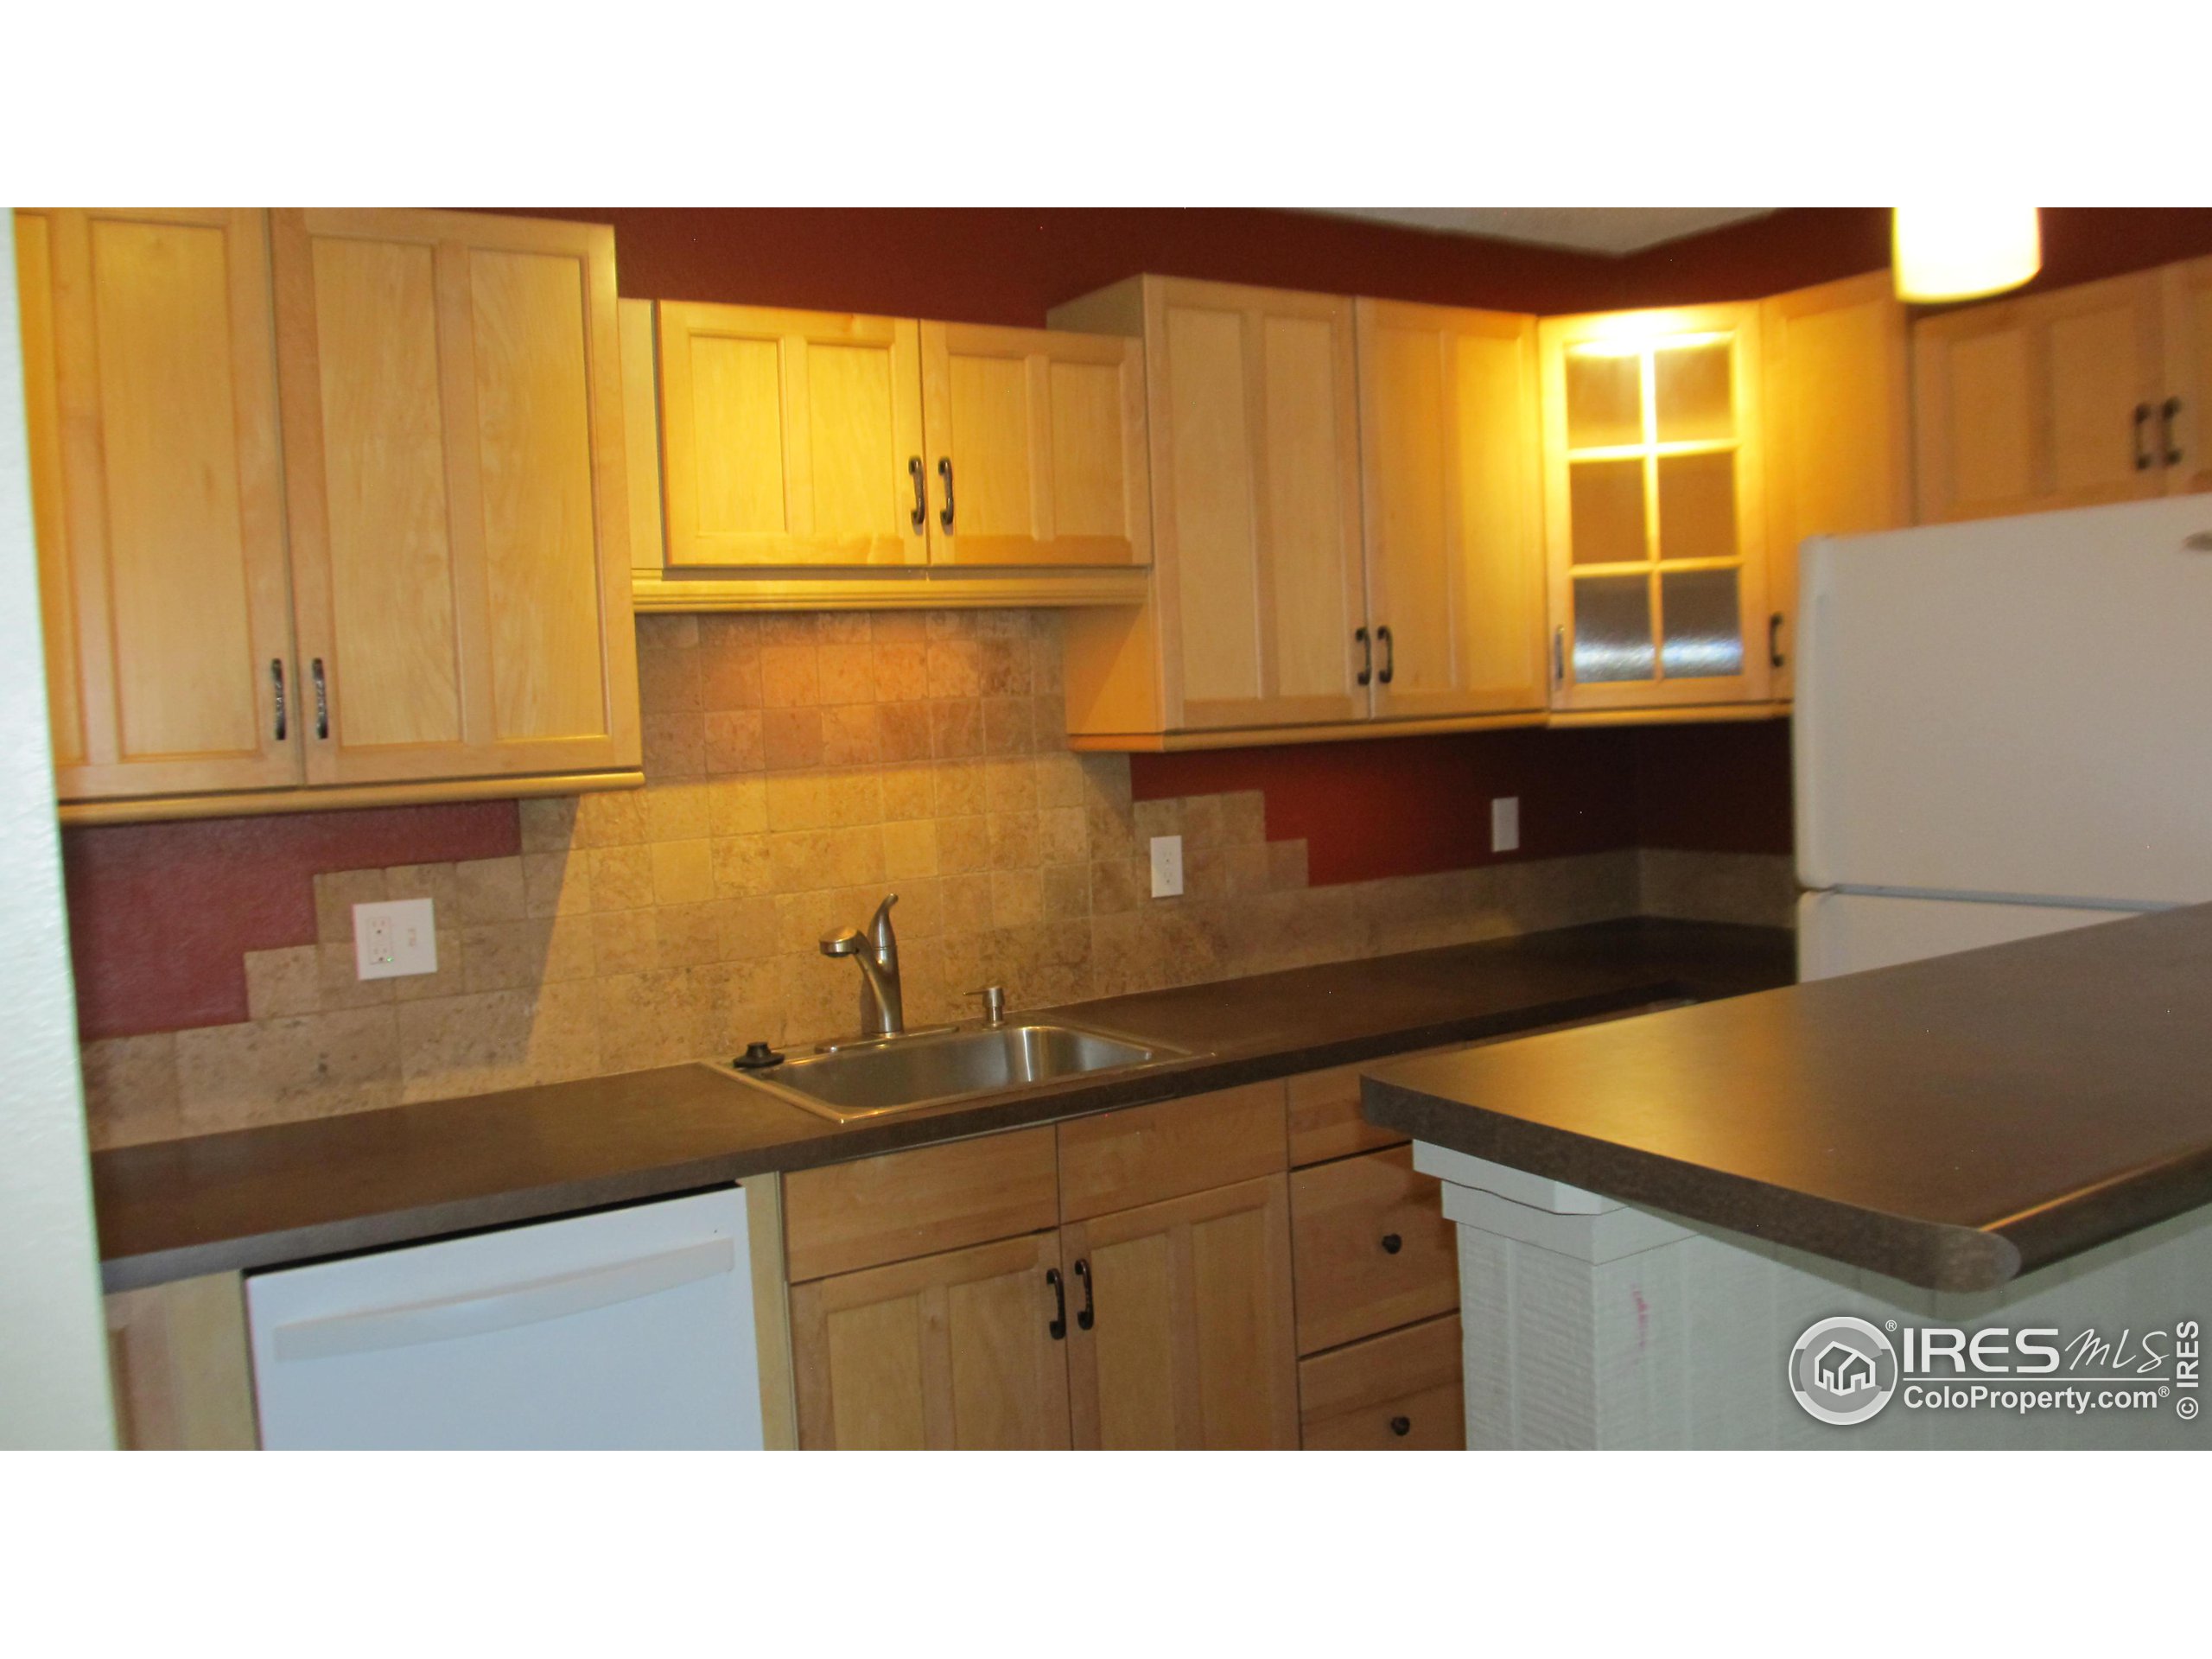 a kitchen with stainless steel appliances kitchen island granite countertop a sink window and cabinets